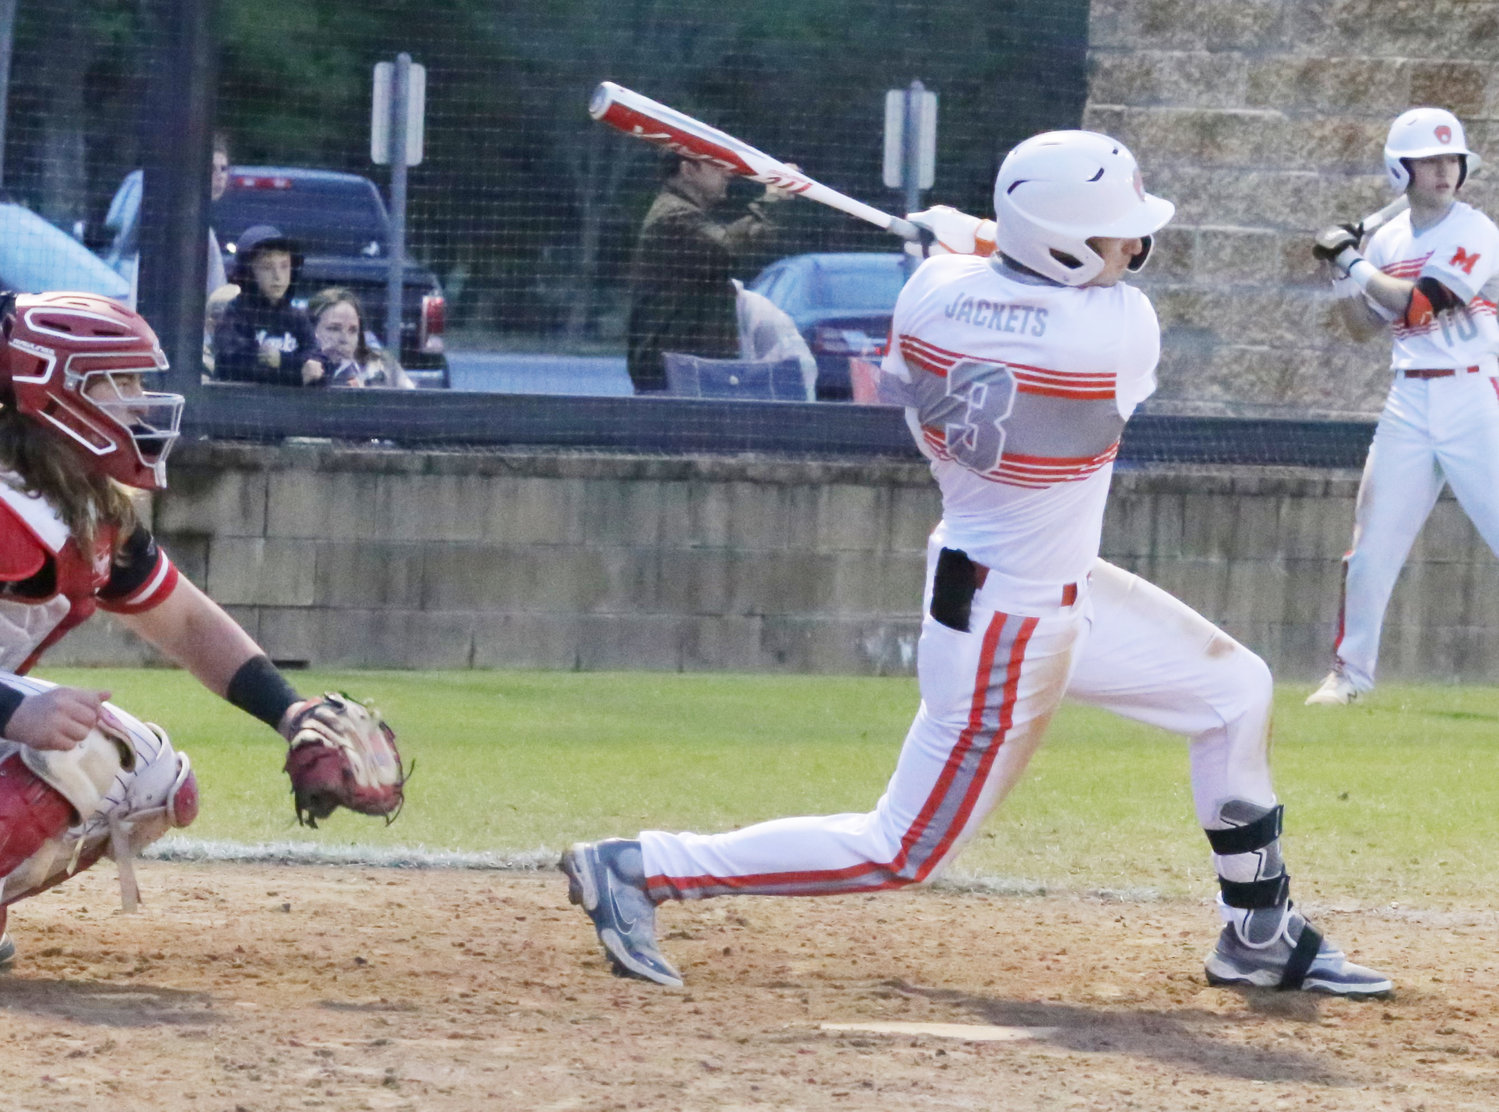 Brady Shrum drives a two-RBI single to center to give Mineola the lead in the sixth against Harmony.